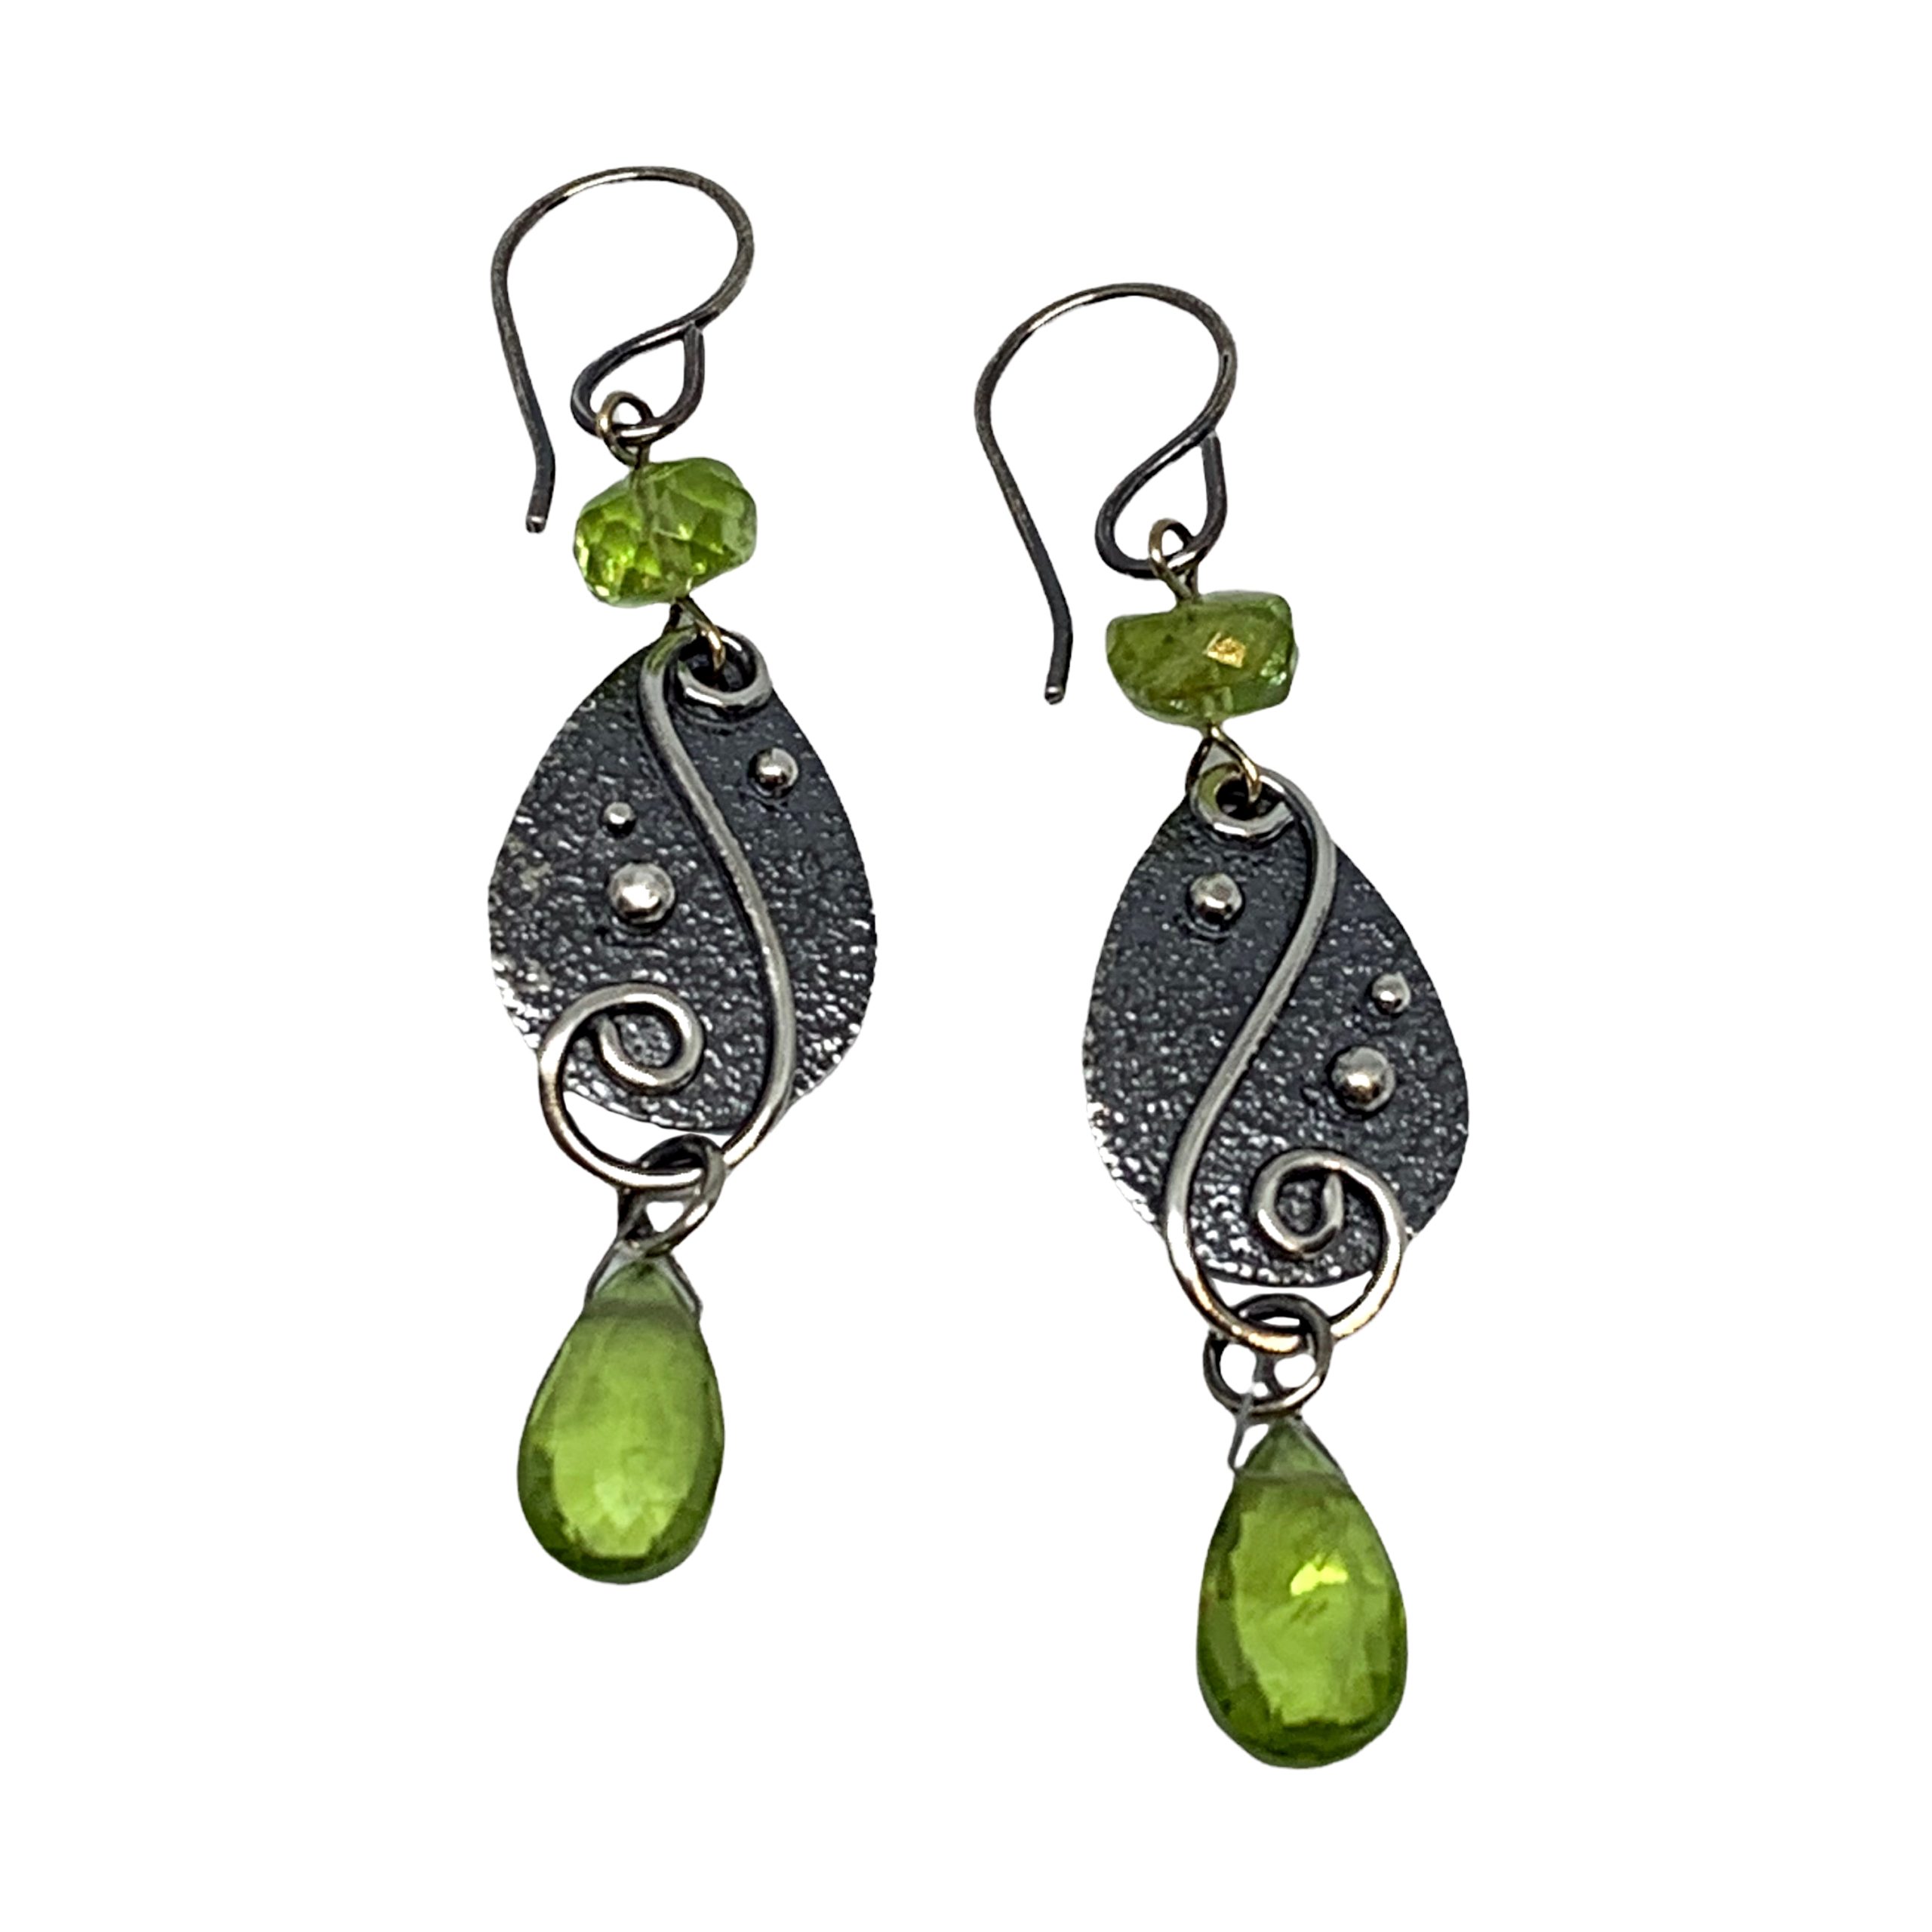 Handmade silver + peridot earrings by A&R Jewellery | Effusion Art Gallery + Cast Glass Studio, Invermere BC